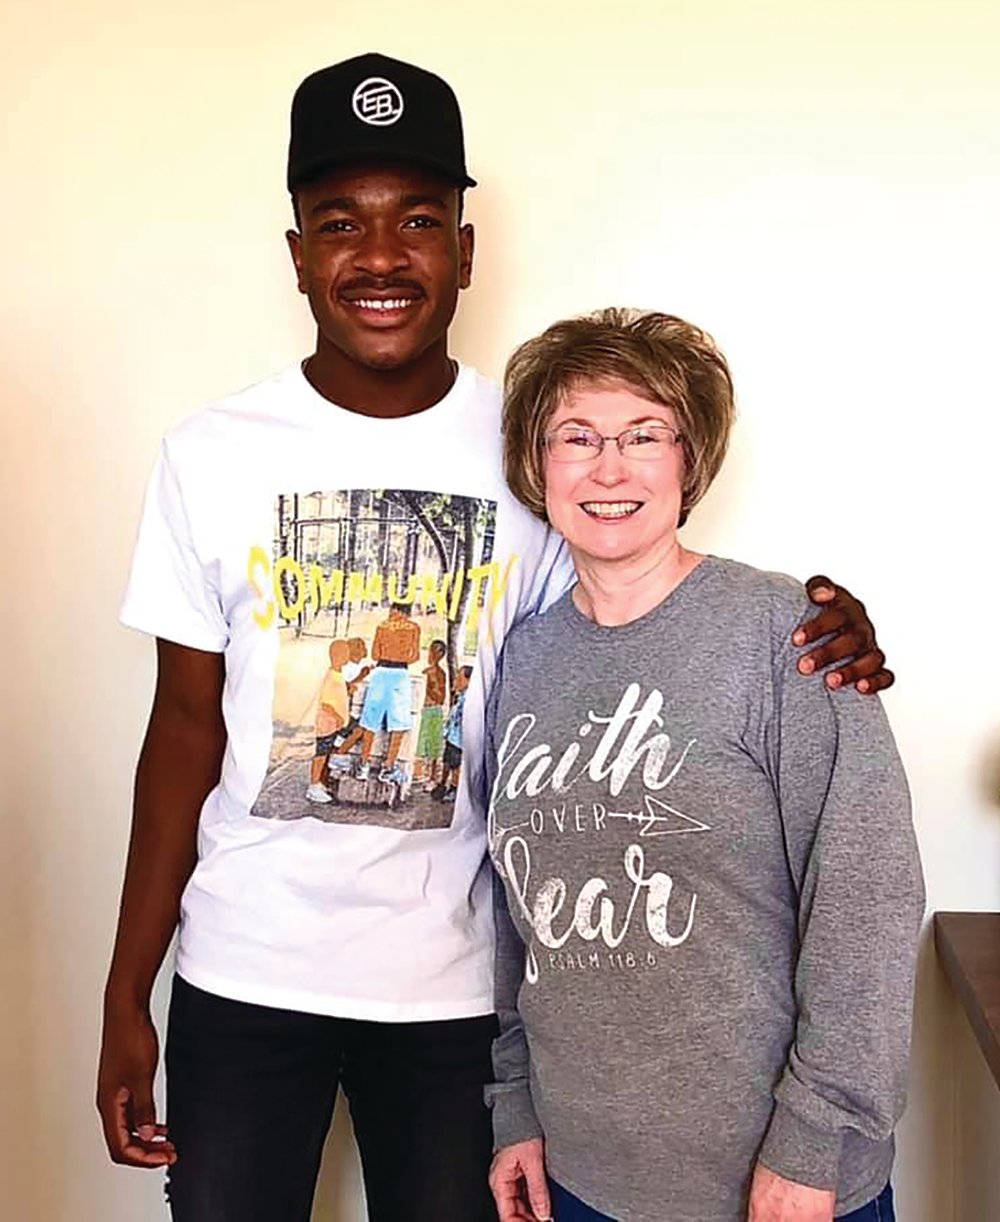 Emmett Bowman, left, poses with Susan Zachary, executive director of Pam’s Promise. Bowman has donated some of the proceeds from the sale of his clothing brand to the local transitional housing organization.